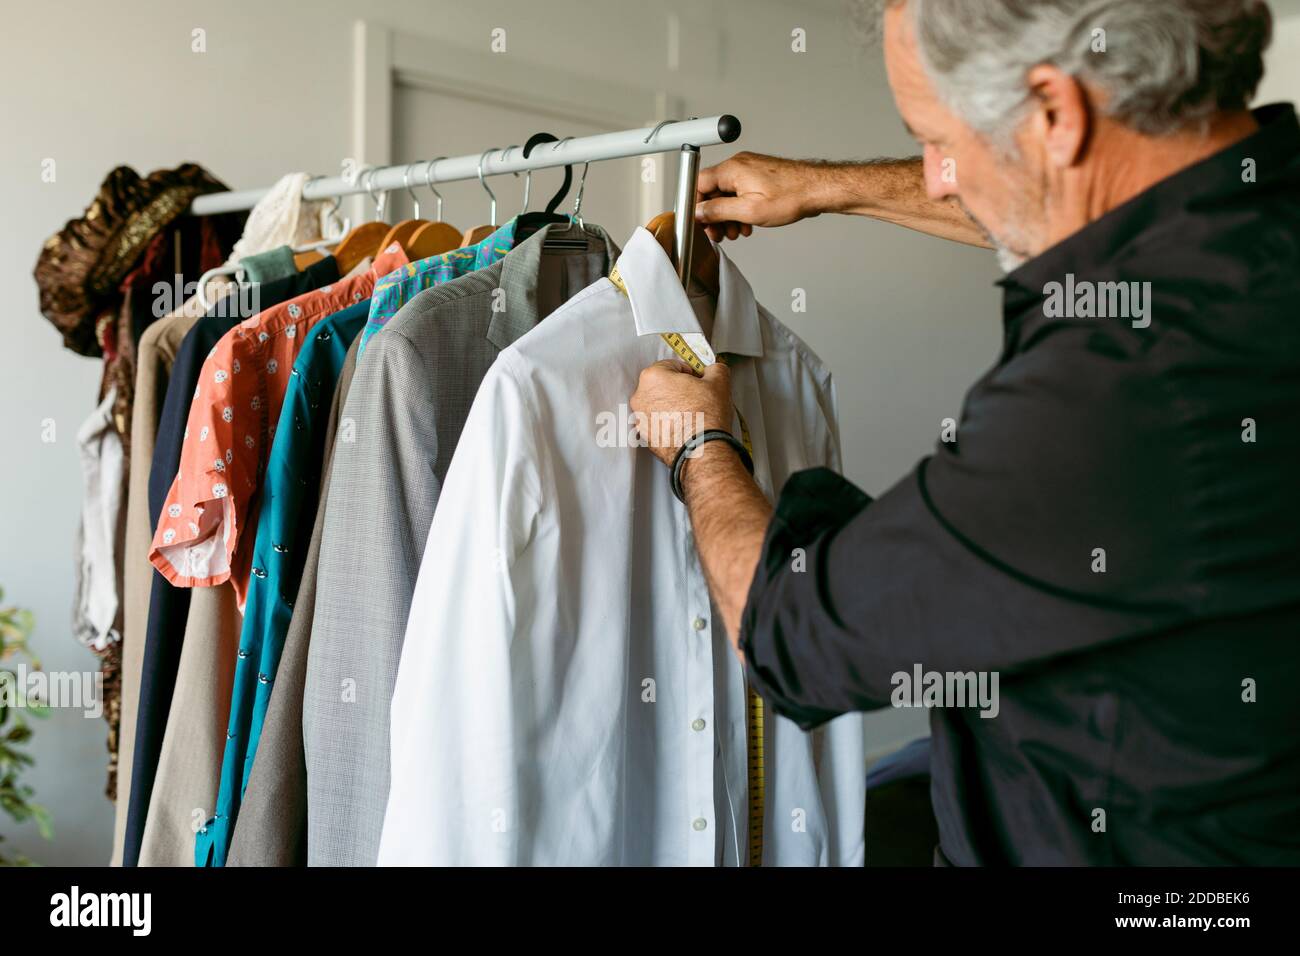 Tailor measuring shirt with tape measure at workplace Stock Photo